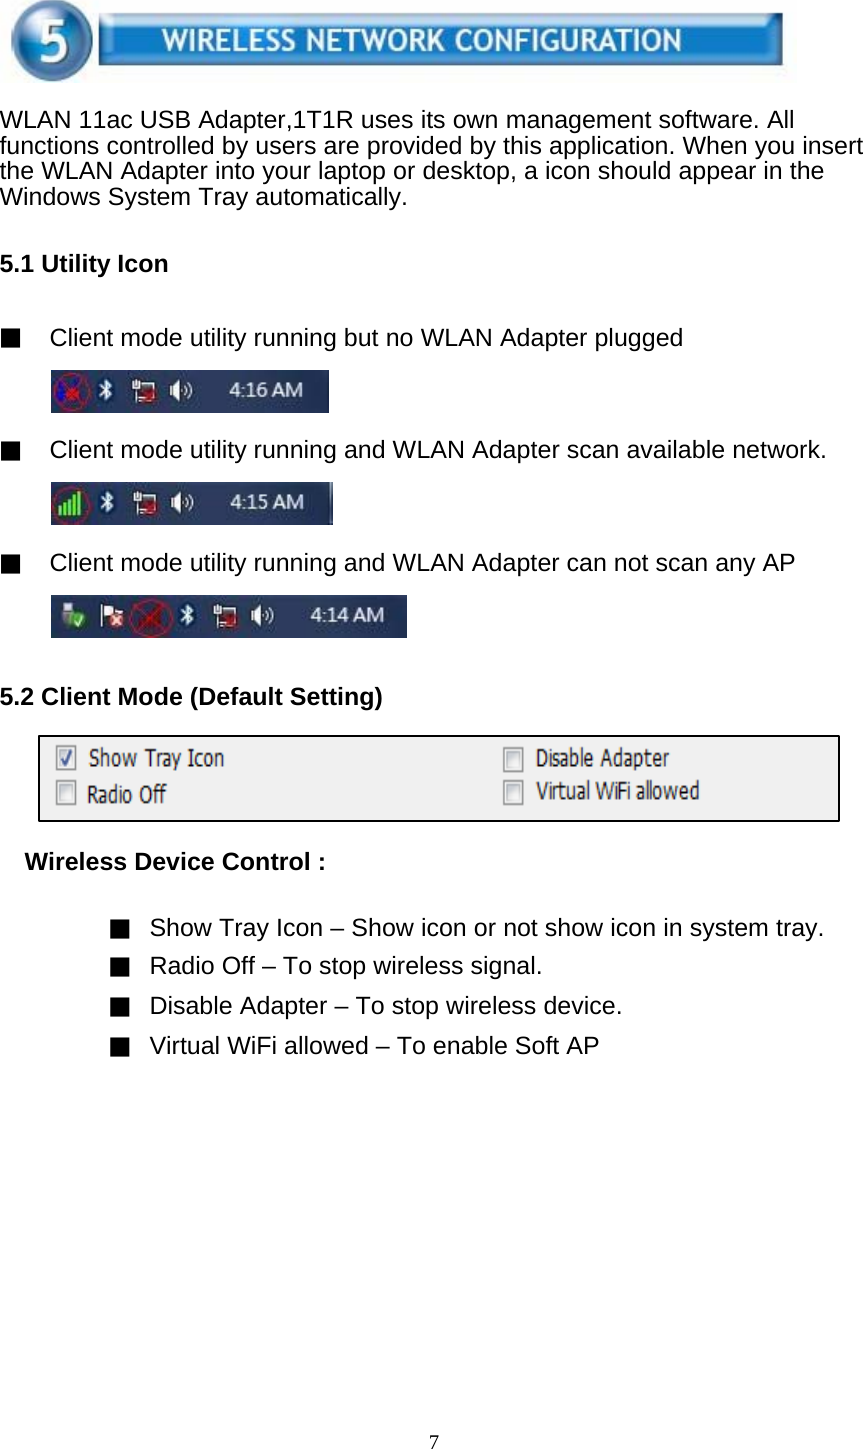 7     WLAN 11ac USB Adapter,1T1R uses its own management software. All functions controlled by users are provided by this application. When you insert the WLAN Adapter into your laptop or desktop, a icon should appear in the Windows System Tray automatically.   5.1 Utility Icon   ▓ Client mode utility running but no WLAN Adapter plugged     ▓ Client mode utility running and WLAN Adapter scan available network.     ▓ Client mode utility running and WLAN Adapter can not scan any AP      5.2 Client Mode (Default Setting)      Wireless Device Control :   ▓ Show Tray Icon – Show icon or not show icon in system tray. ▓ Radio Off – To stop wireless signal. ▓ Disable Adapter – To stop wireless device. ▓ Virtual WiFi allowed – To enable Soft AP   